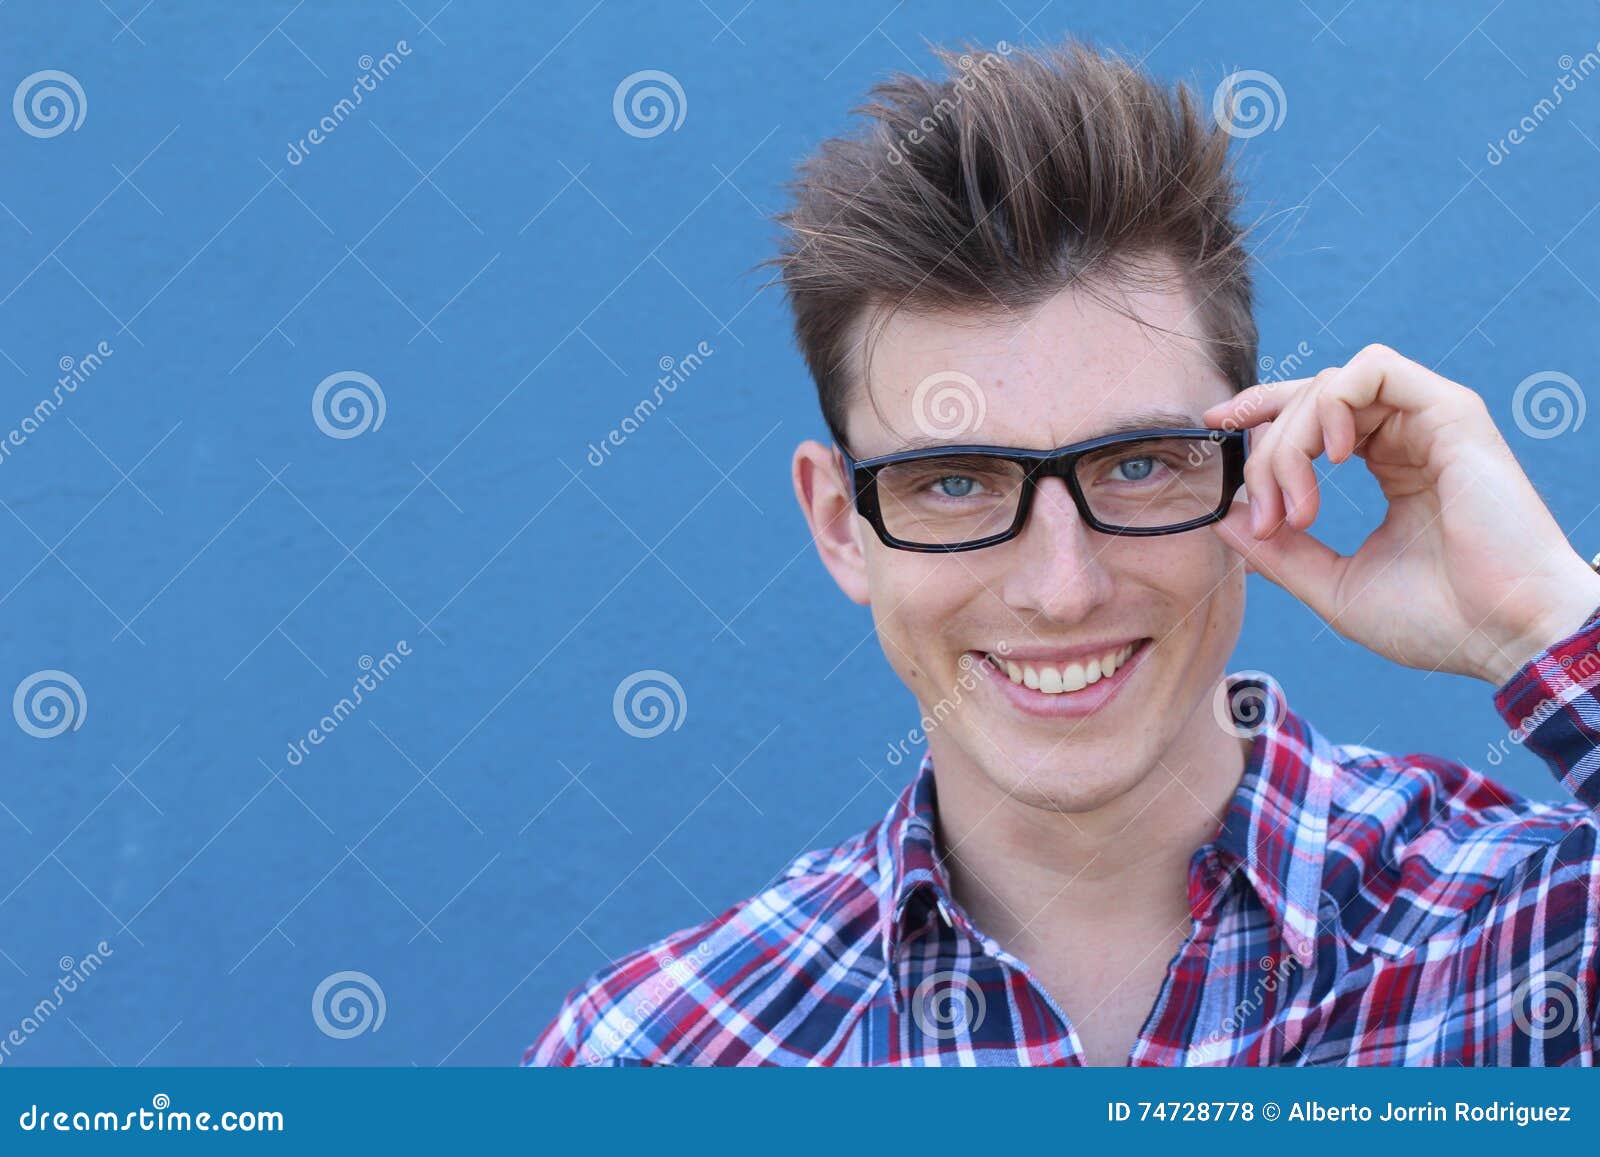 Young Male College Student with Glasses Stock Photo - Image of ...